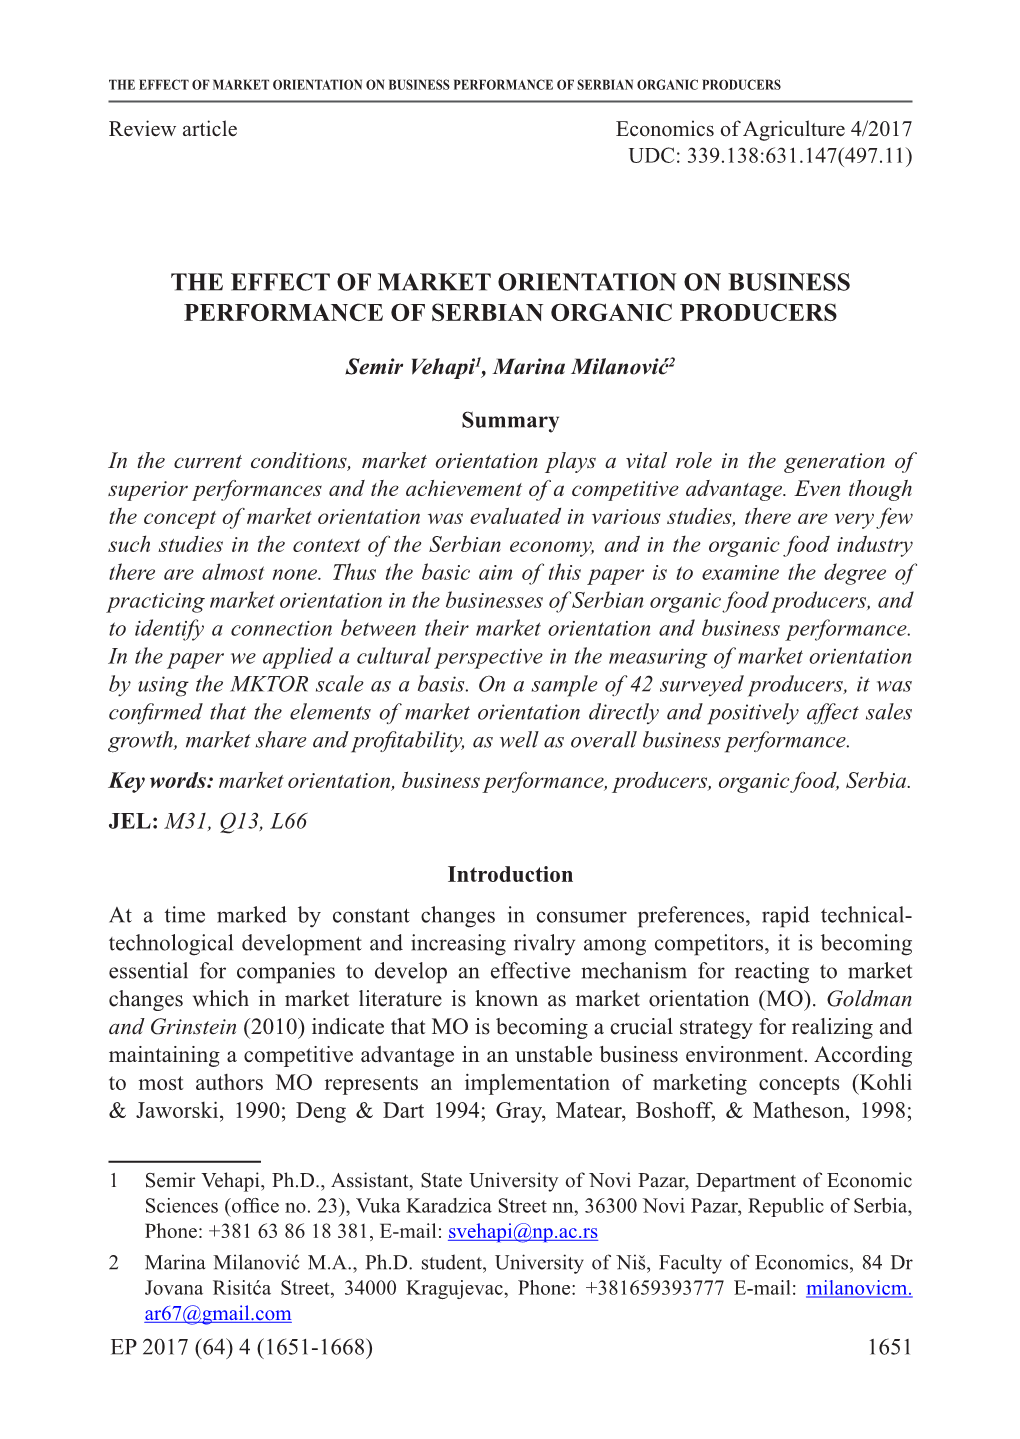 The Effect of Market Orientation on Business Performance of Serbian Organic Producers